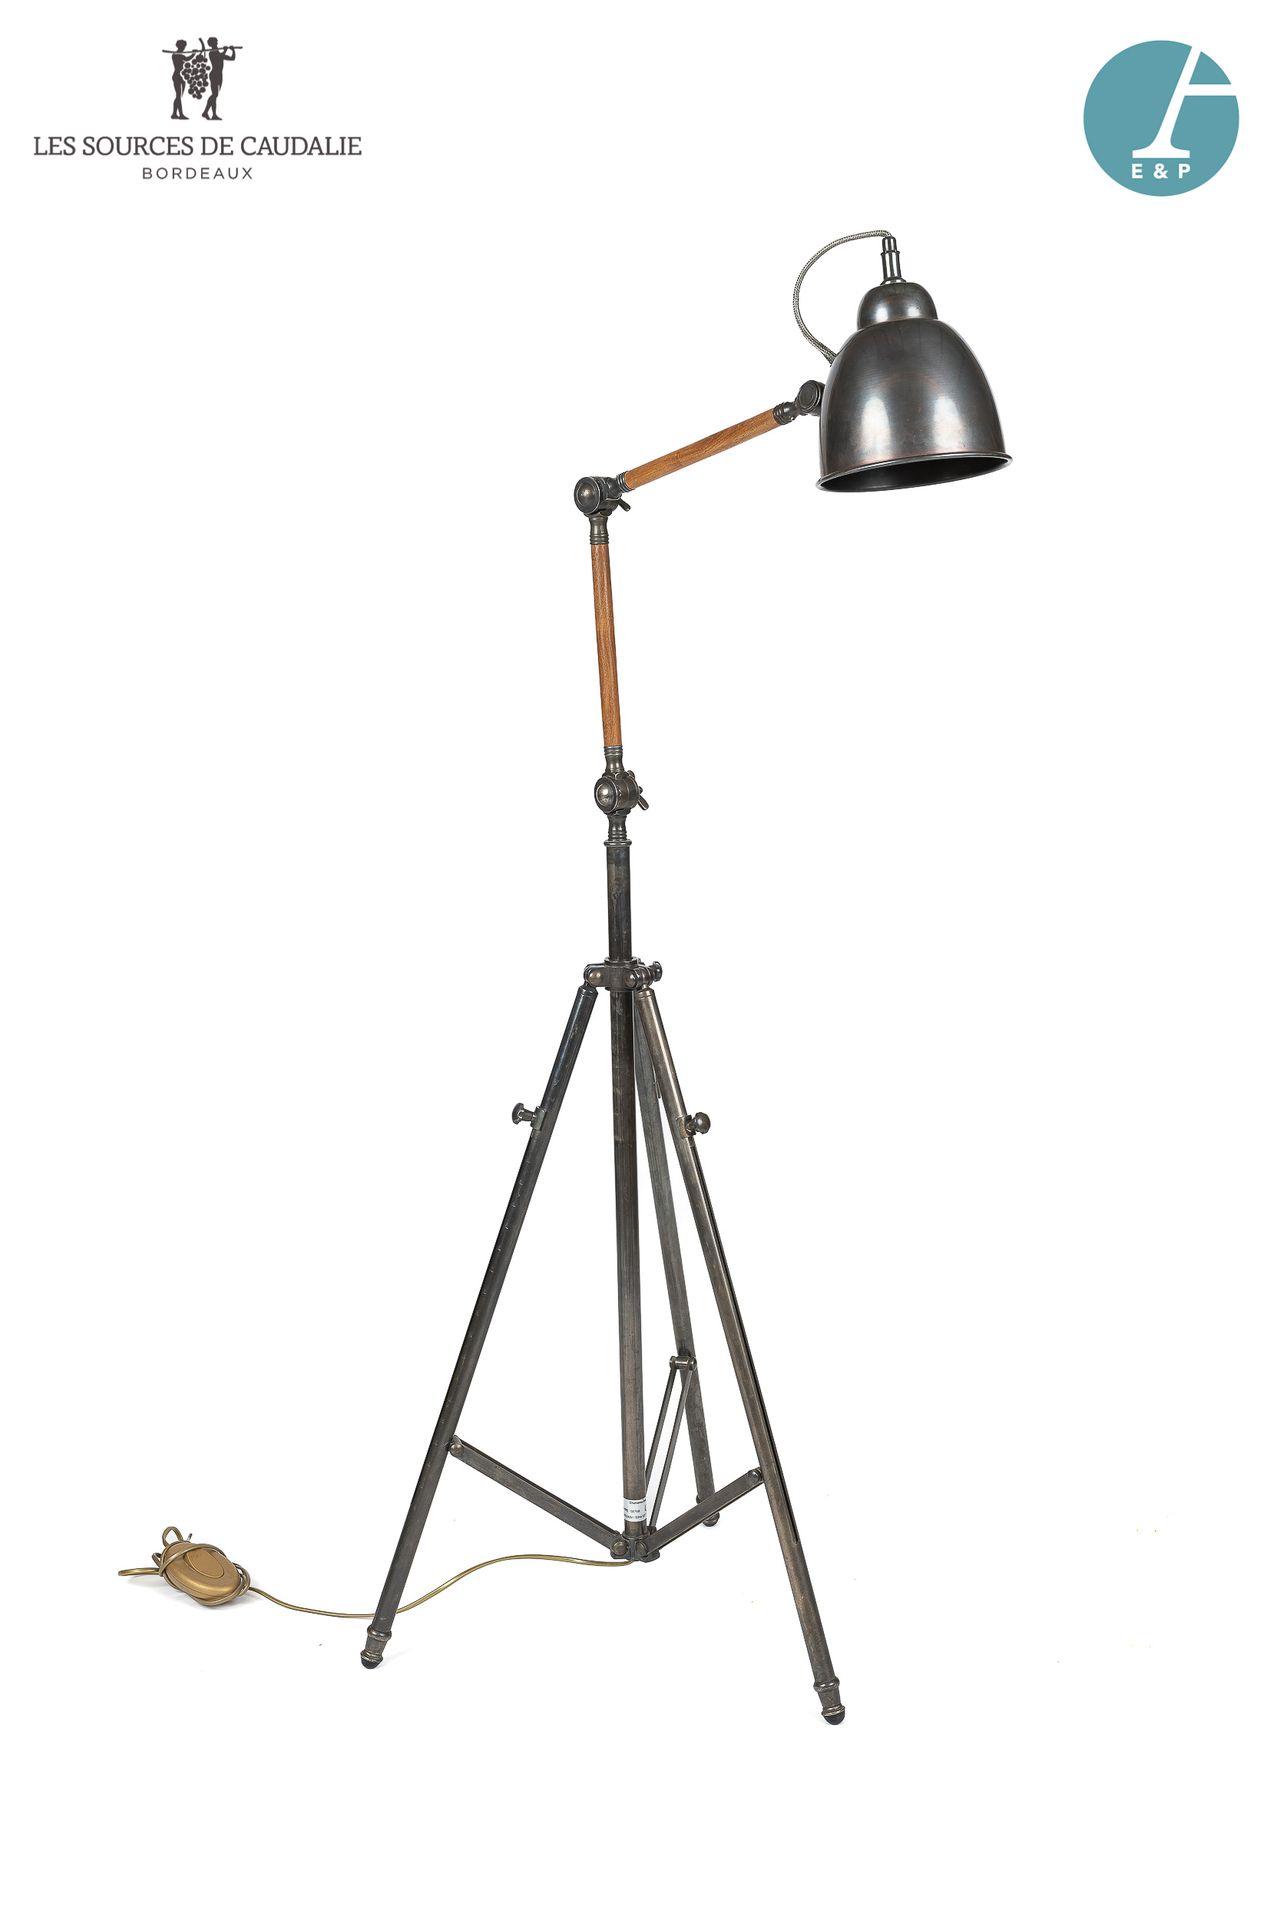 Null Articulated floor lamp in metal and wood, industrial style.

H : 177,5cm